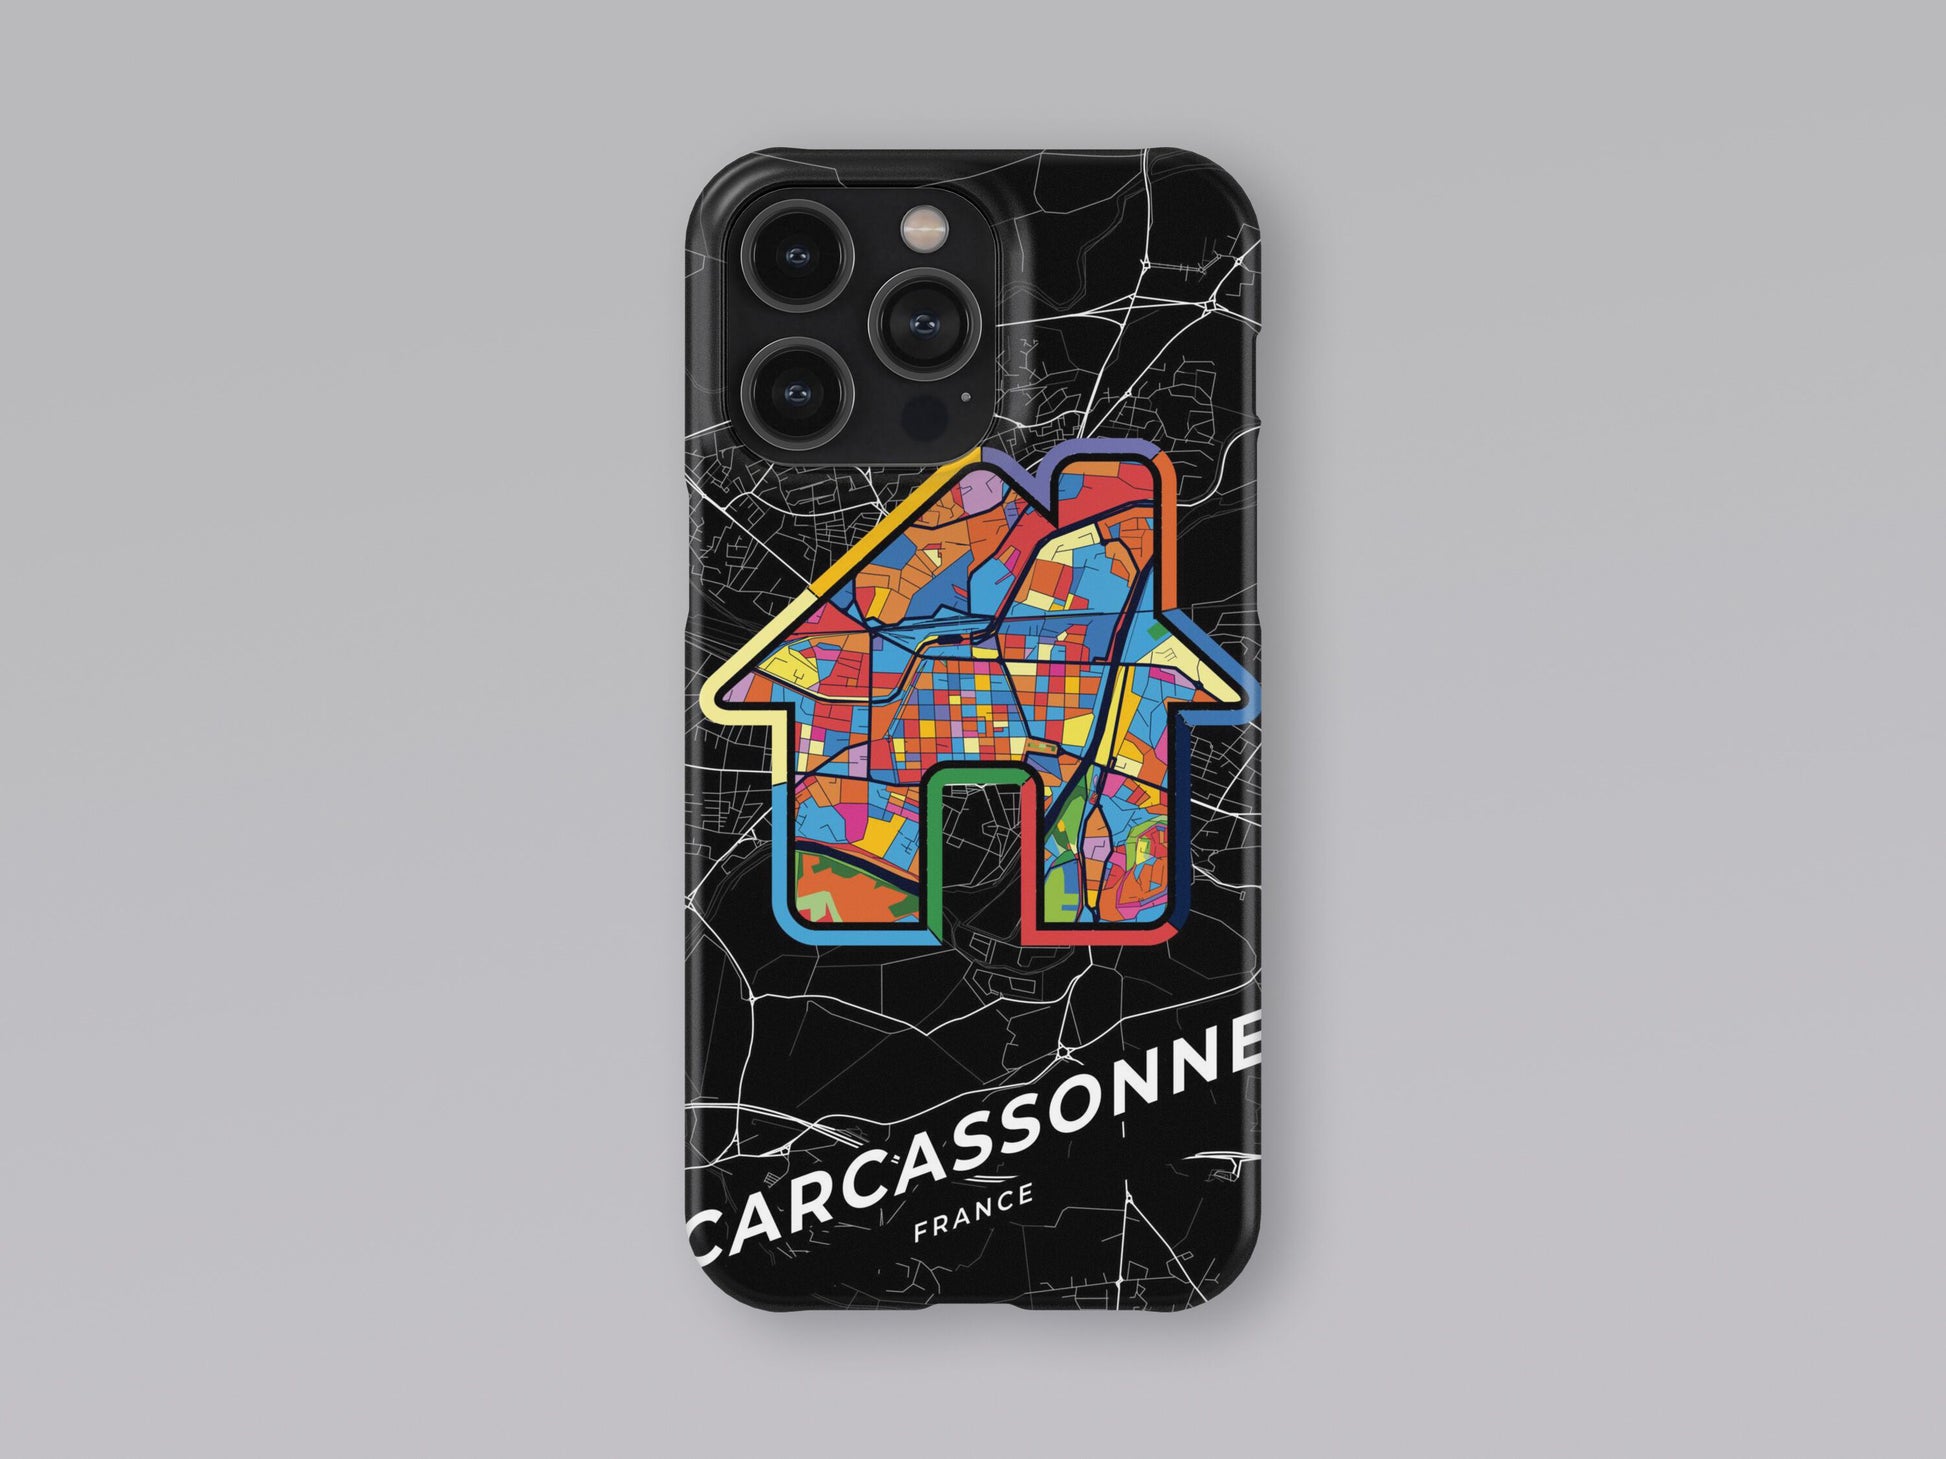 Carcassonne France slim phone case with colorful icon. Birthday, wedding or housewarming gift. Couple match cases. 3